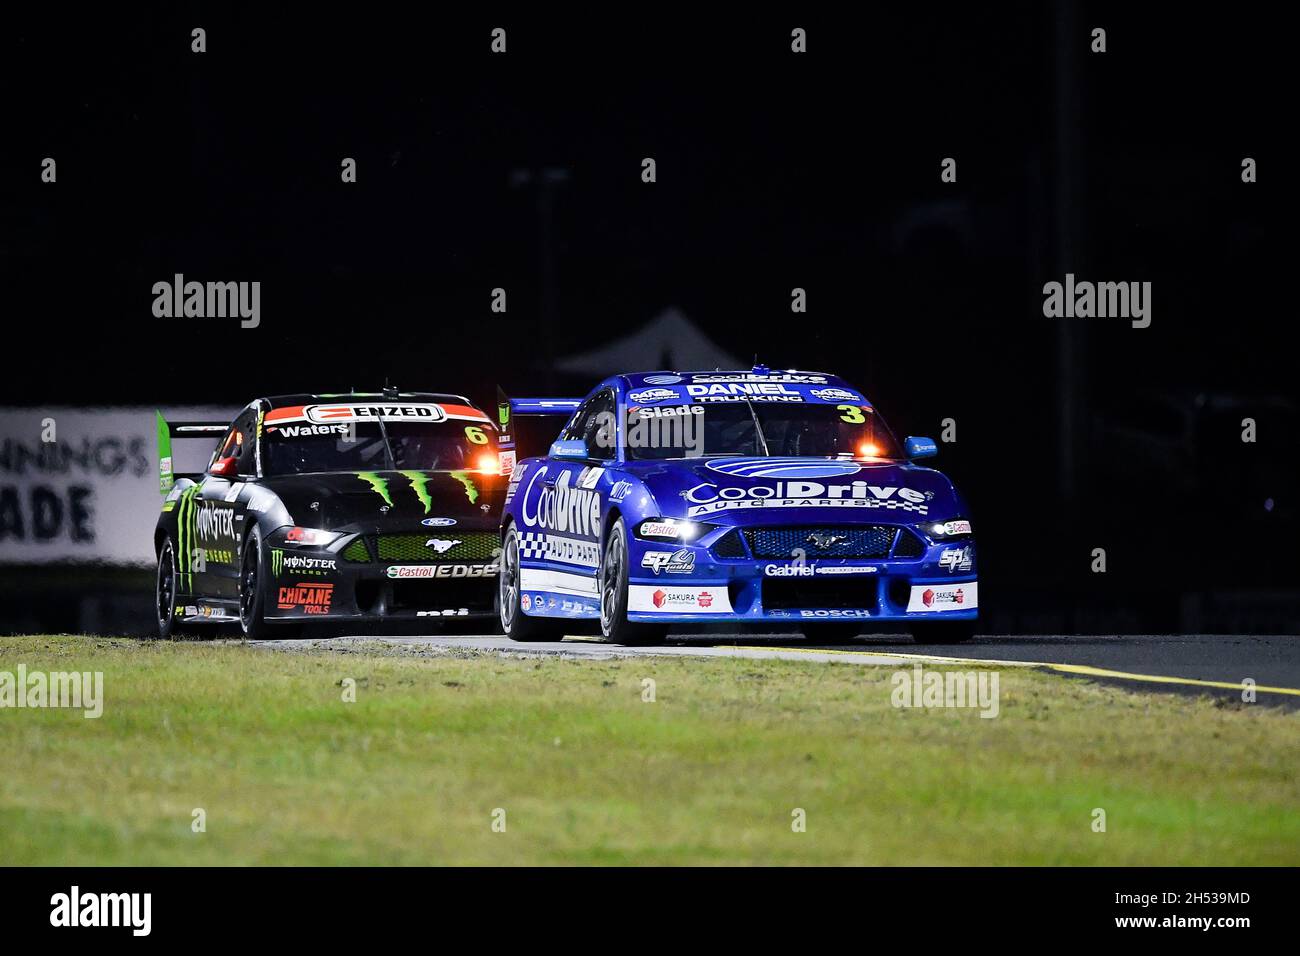 Sydney, Australia, 6 November, 2021. Tim Slade in the Blanchard Racing Team Ford Mustang ahead of Cameron Waters in the Monster Energy Racing Ford Mustang during the V8 Supercars Sydney SuperNight at Sydney Motorsport Park, on November 06, 2021 in Sydney, Australia. Credit: Steven Markham/Speed Media/Alamy Live News Stock Photo